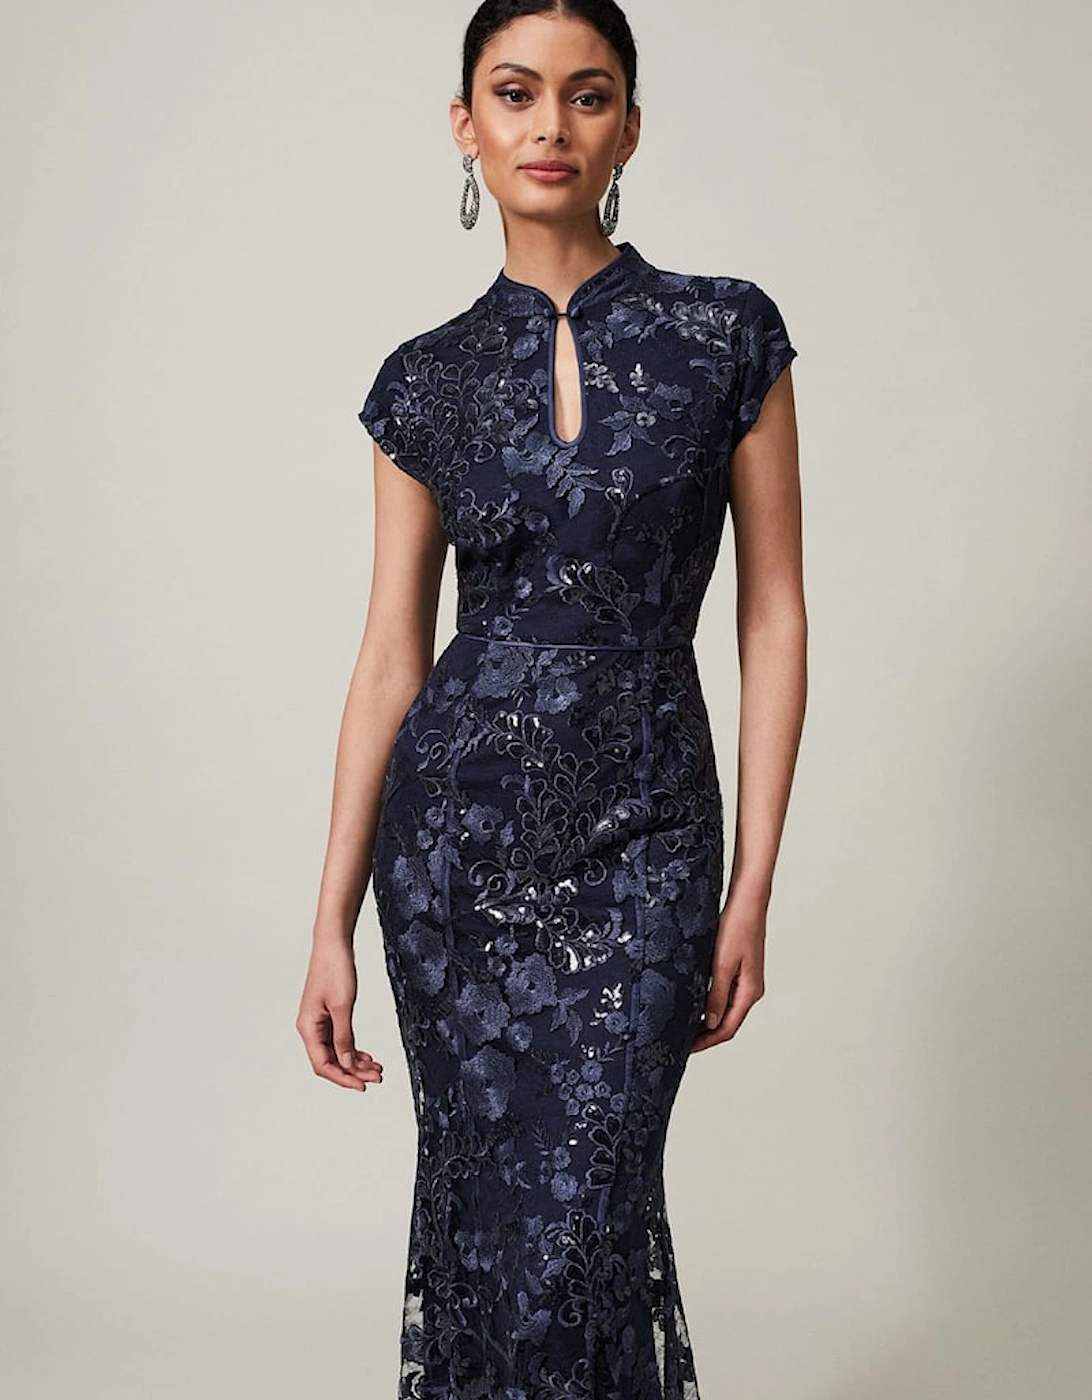 Sofia Embroidered Sequin Dress